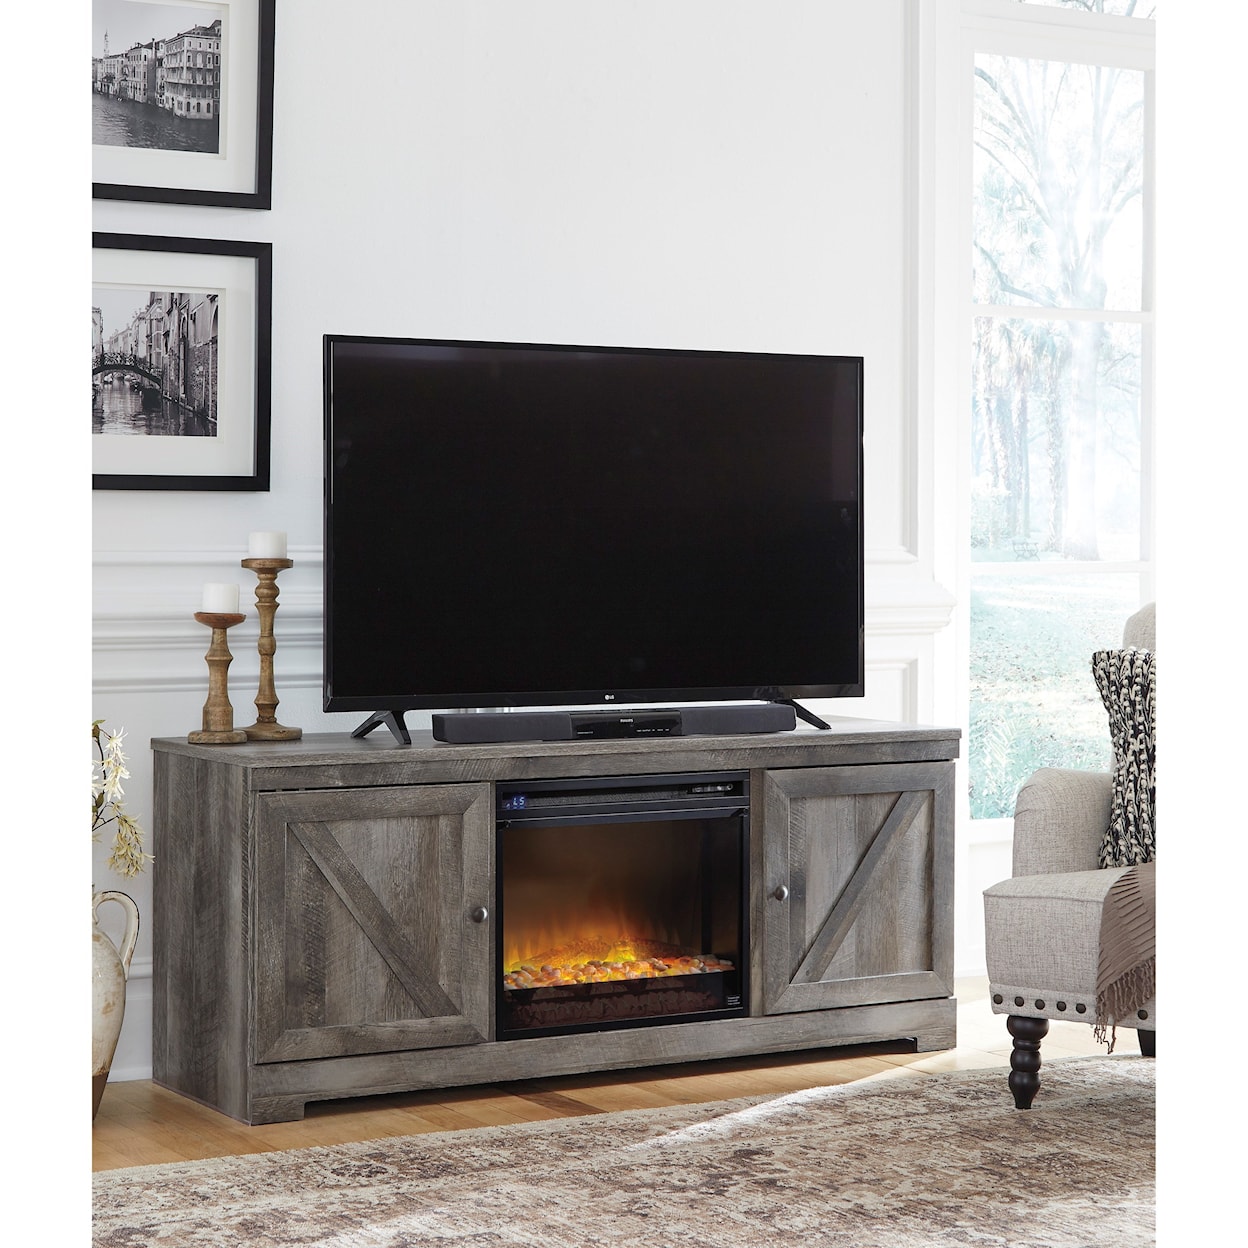 StyleLine Wynnlow Large TV Stand with Fireplace